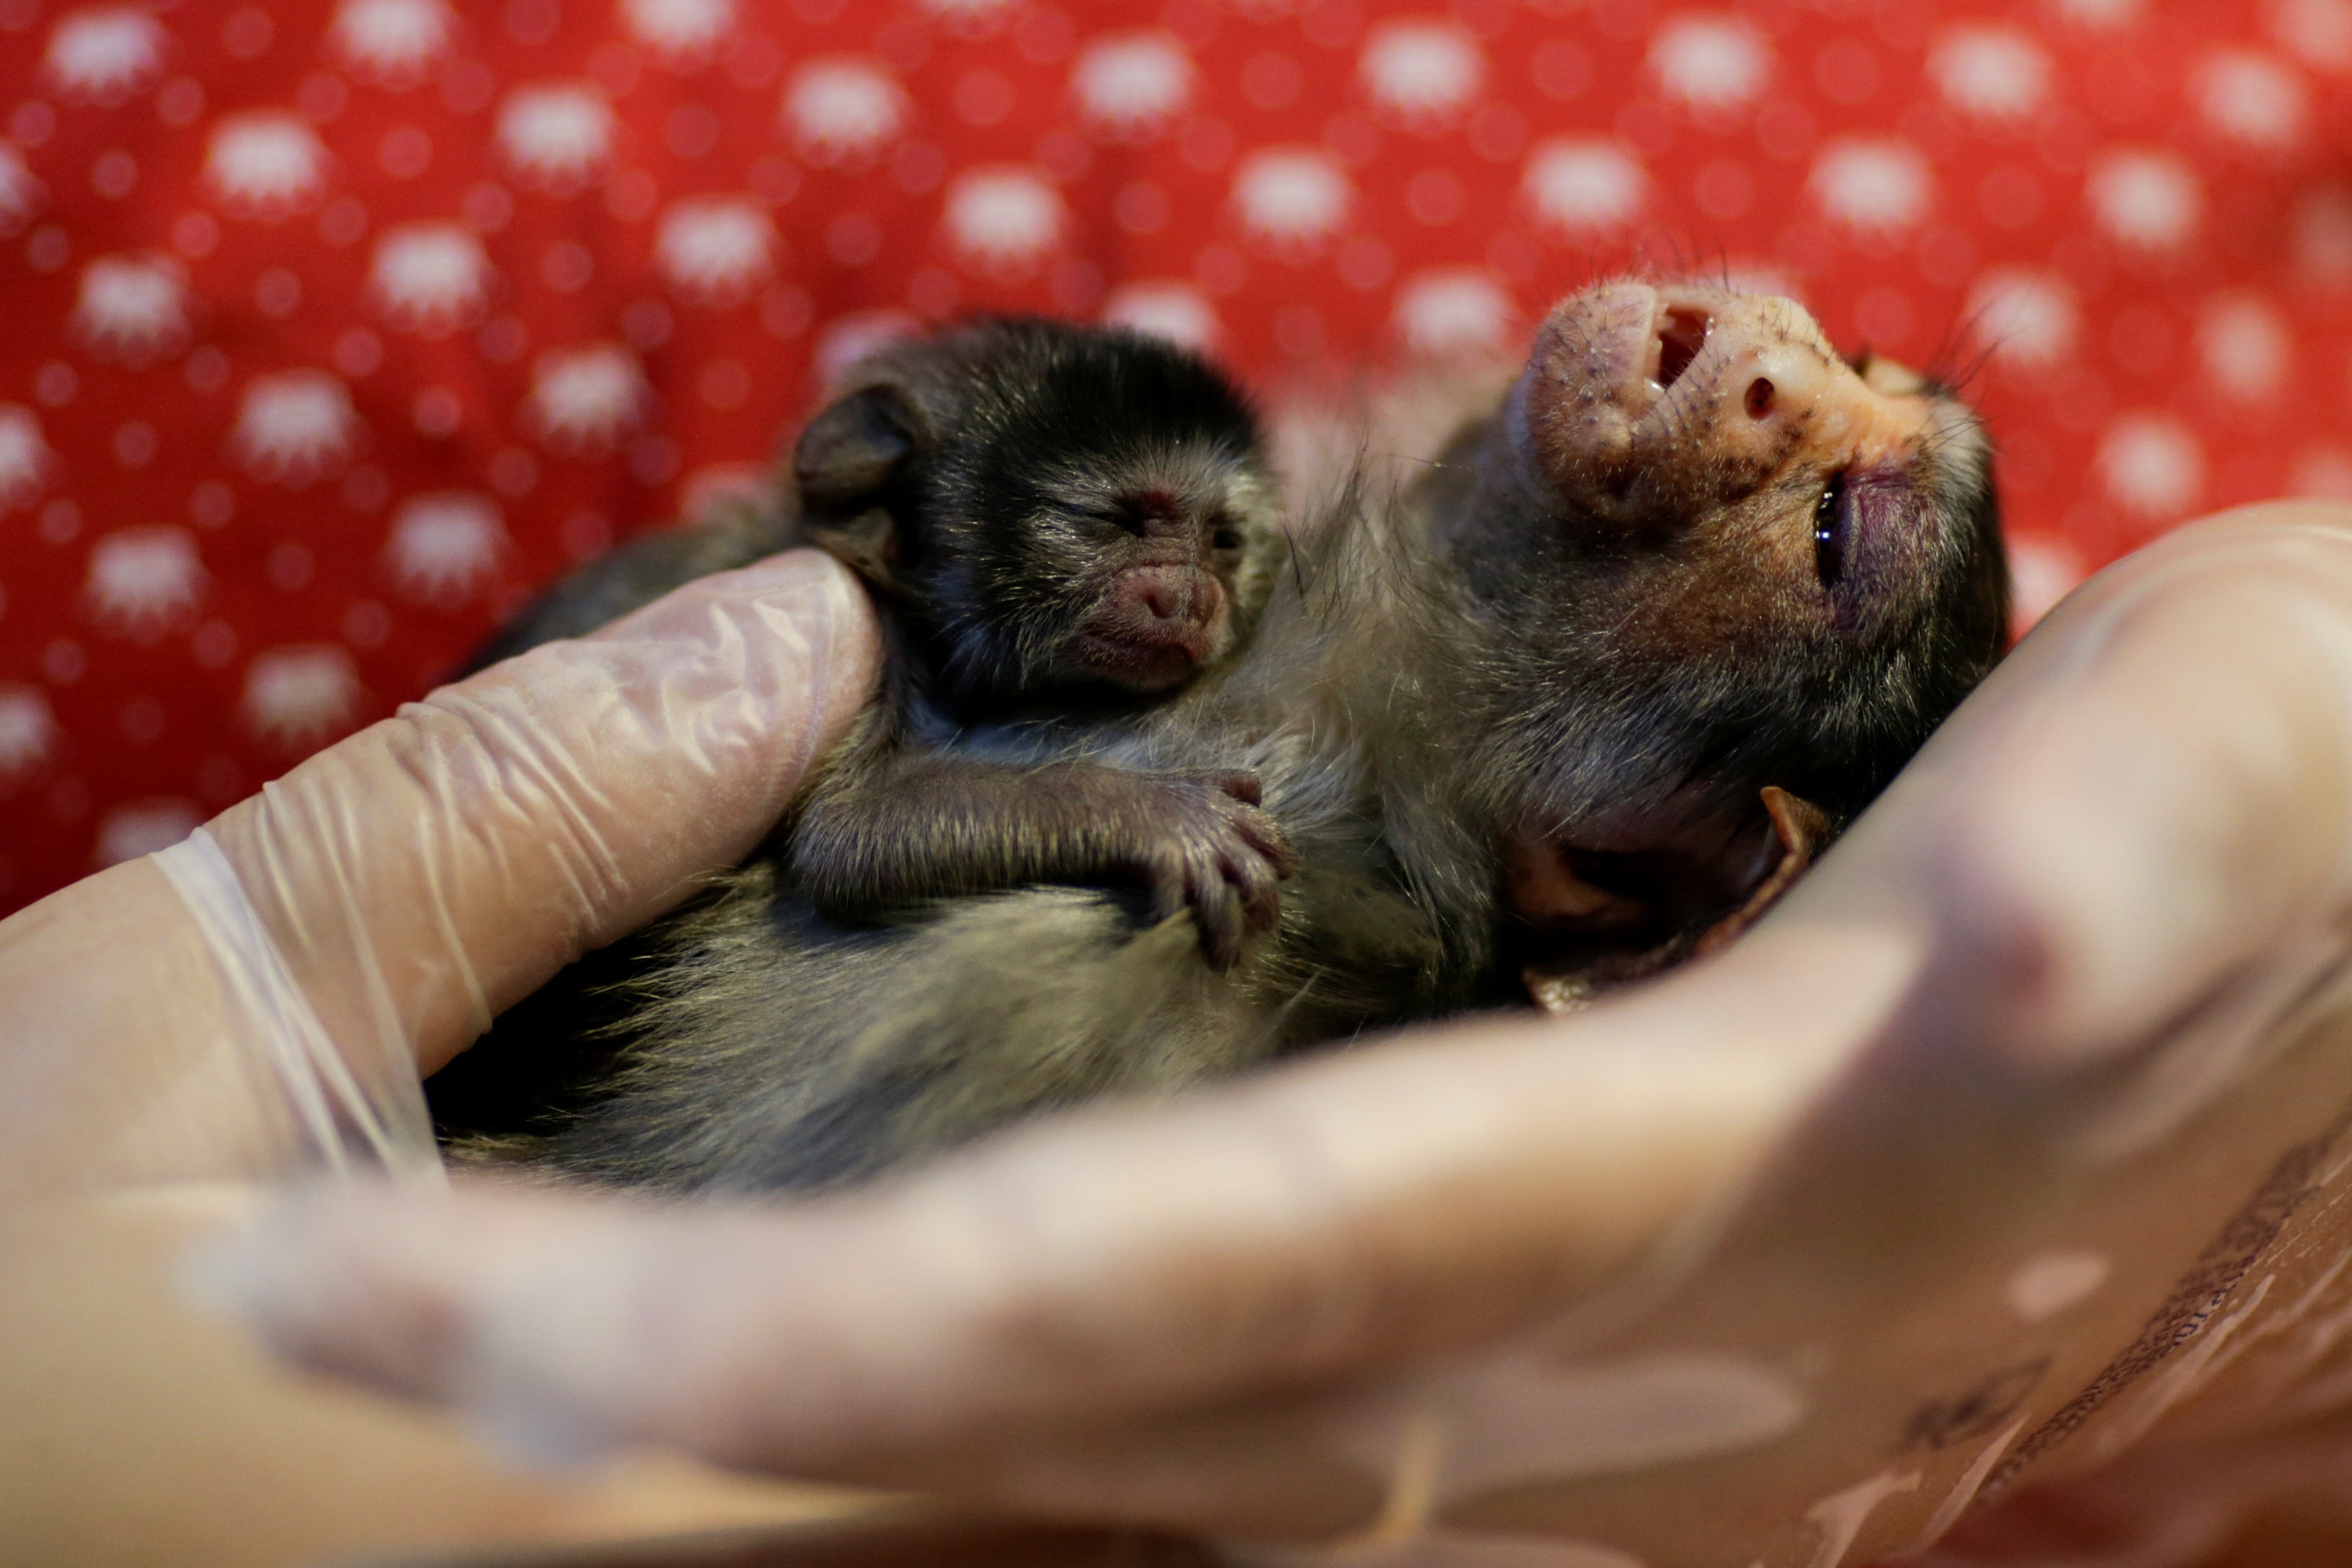 Xita, a Rondon’s marmoset, who was rescued by the state environmental police after giving birth, at Clinidog veterinary clinic, in Porto Velho, Brazil